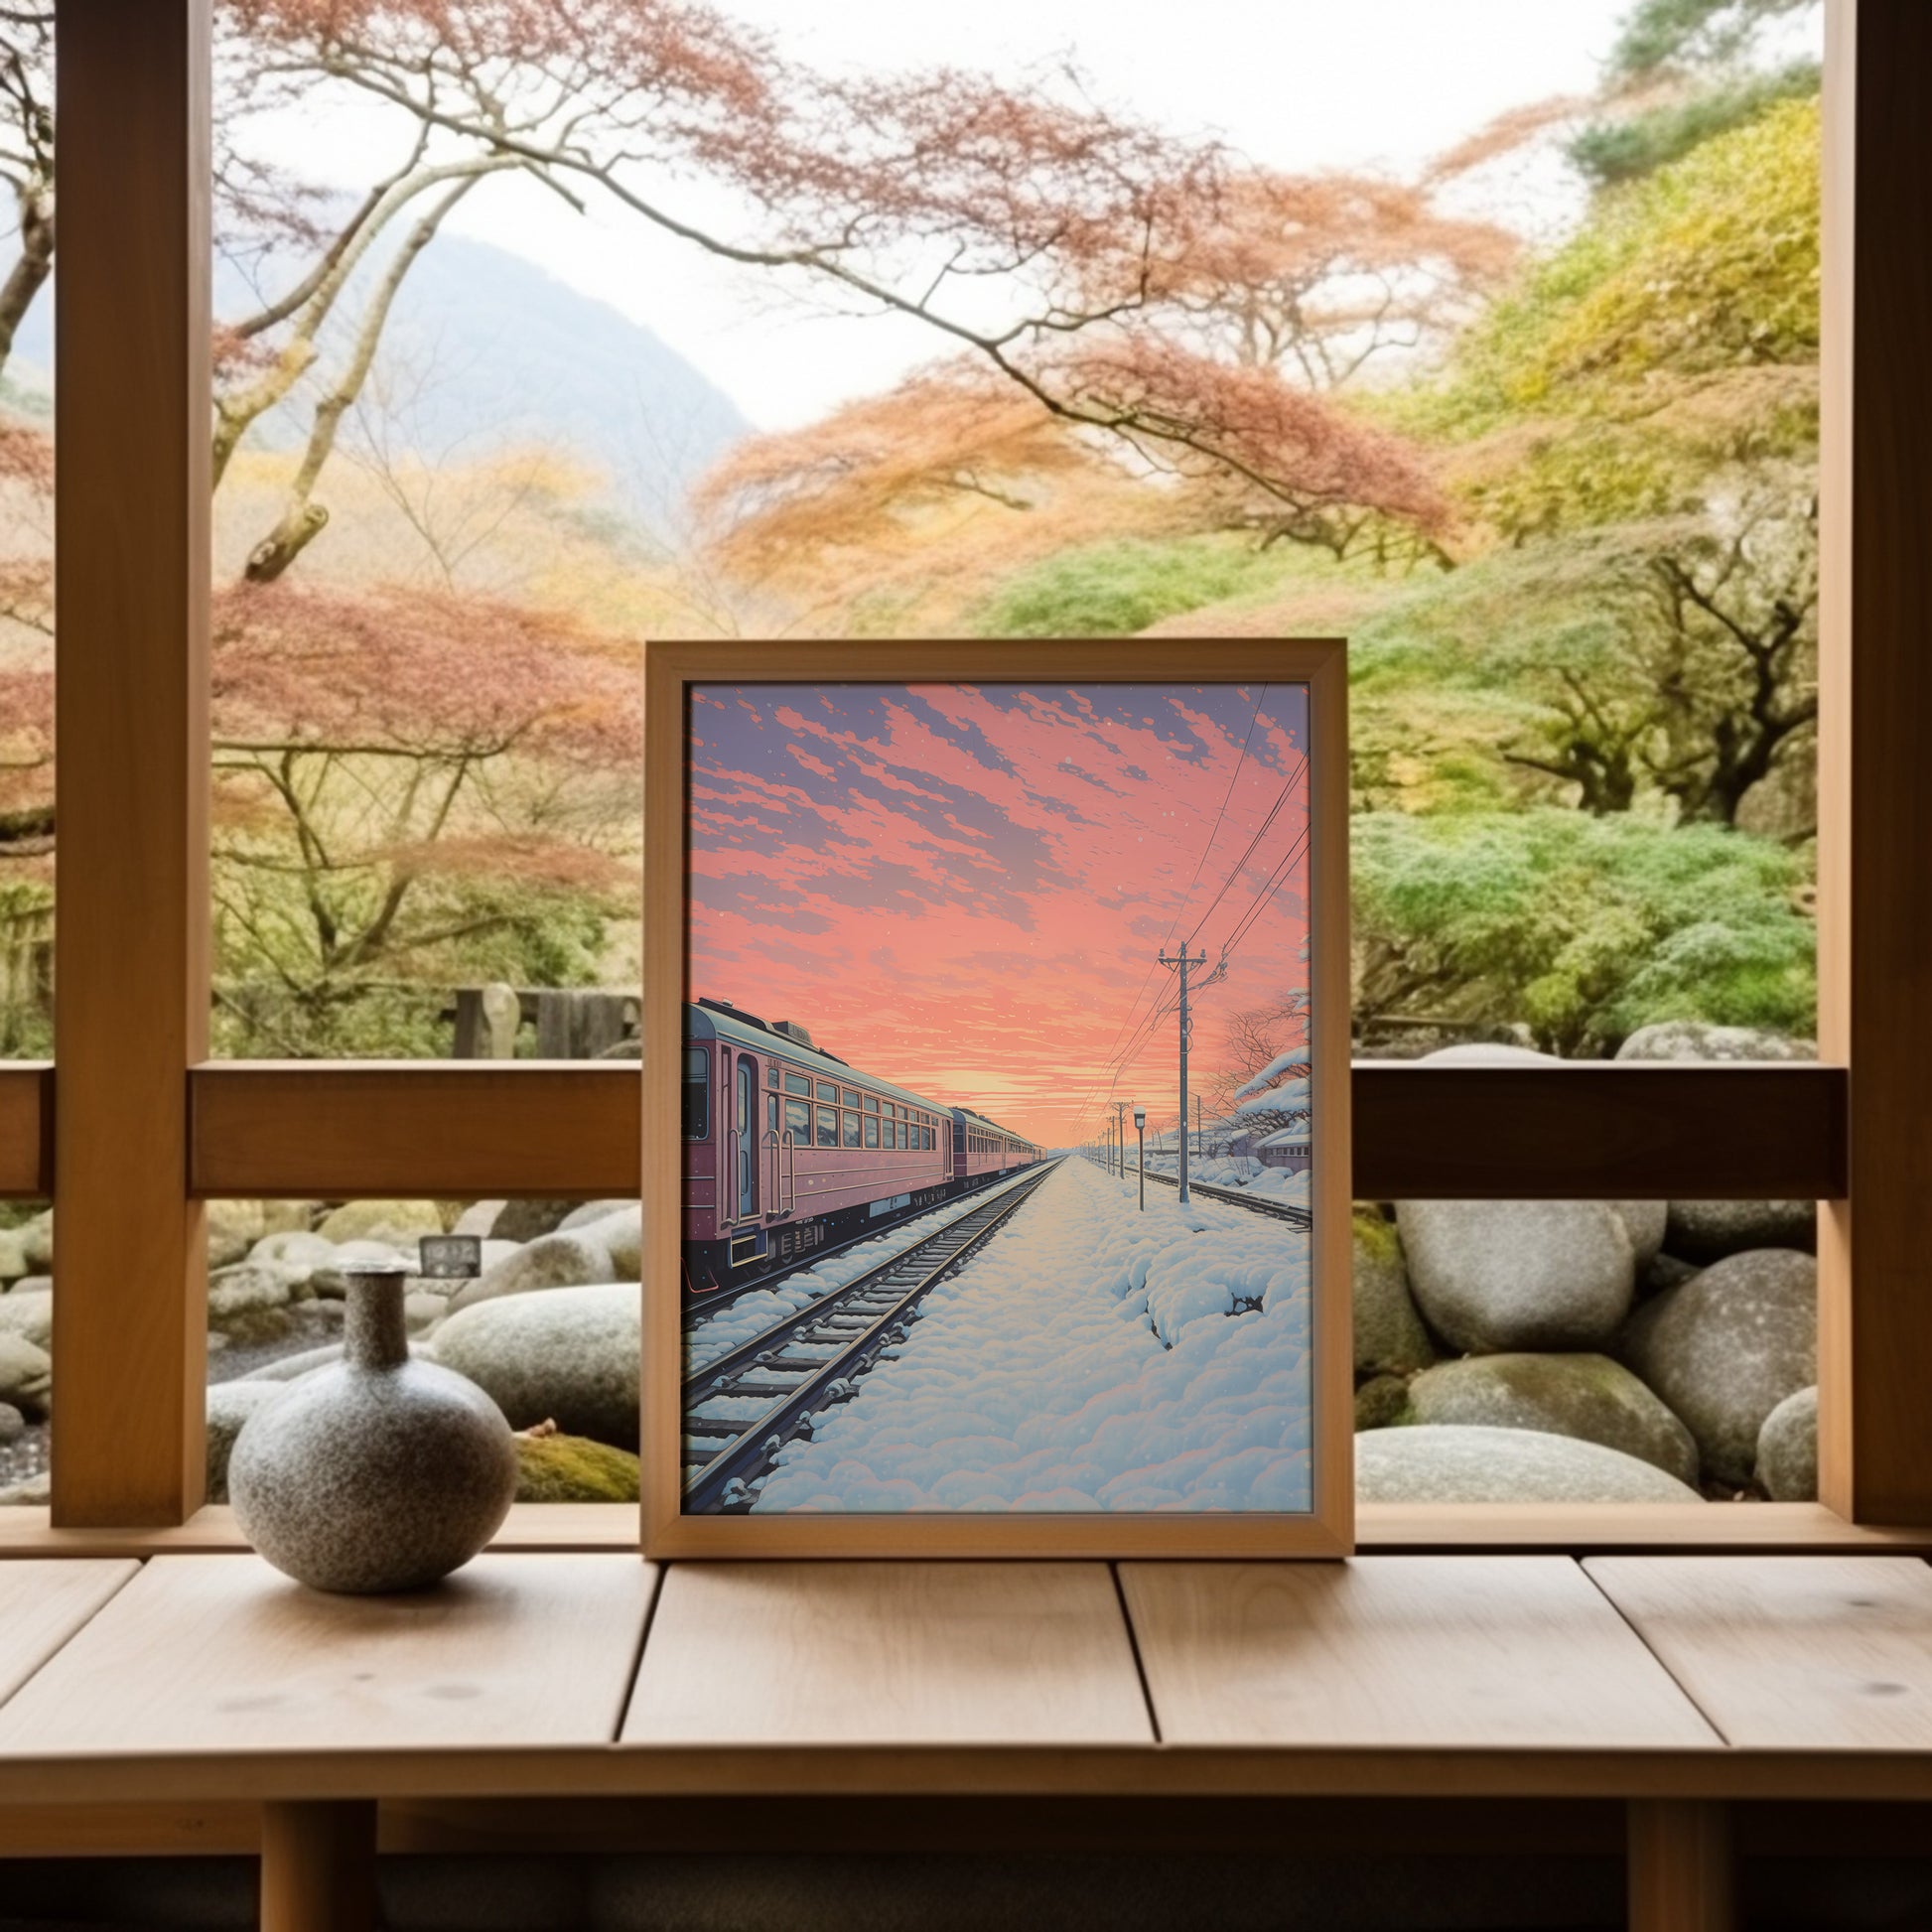 A painting of a train on a snow-covered track at sunset, displayed in a peaceful room with a view of nature.